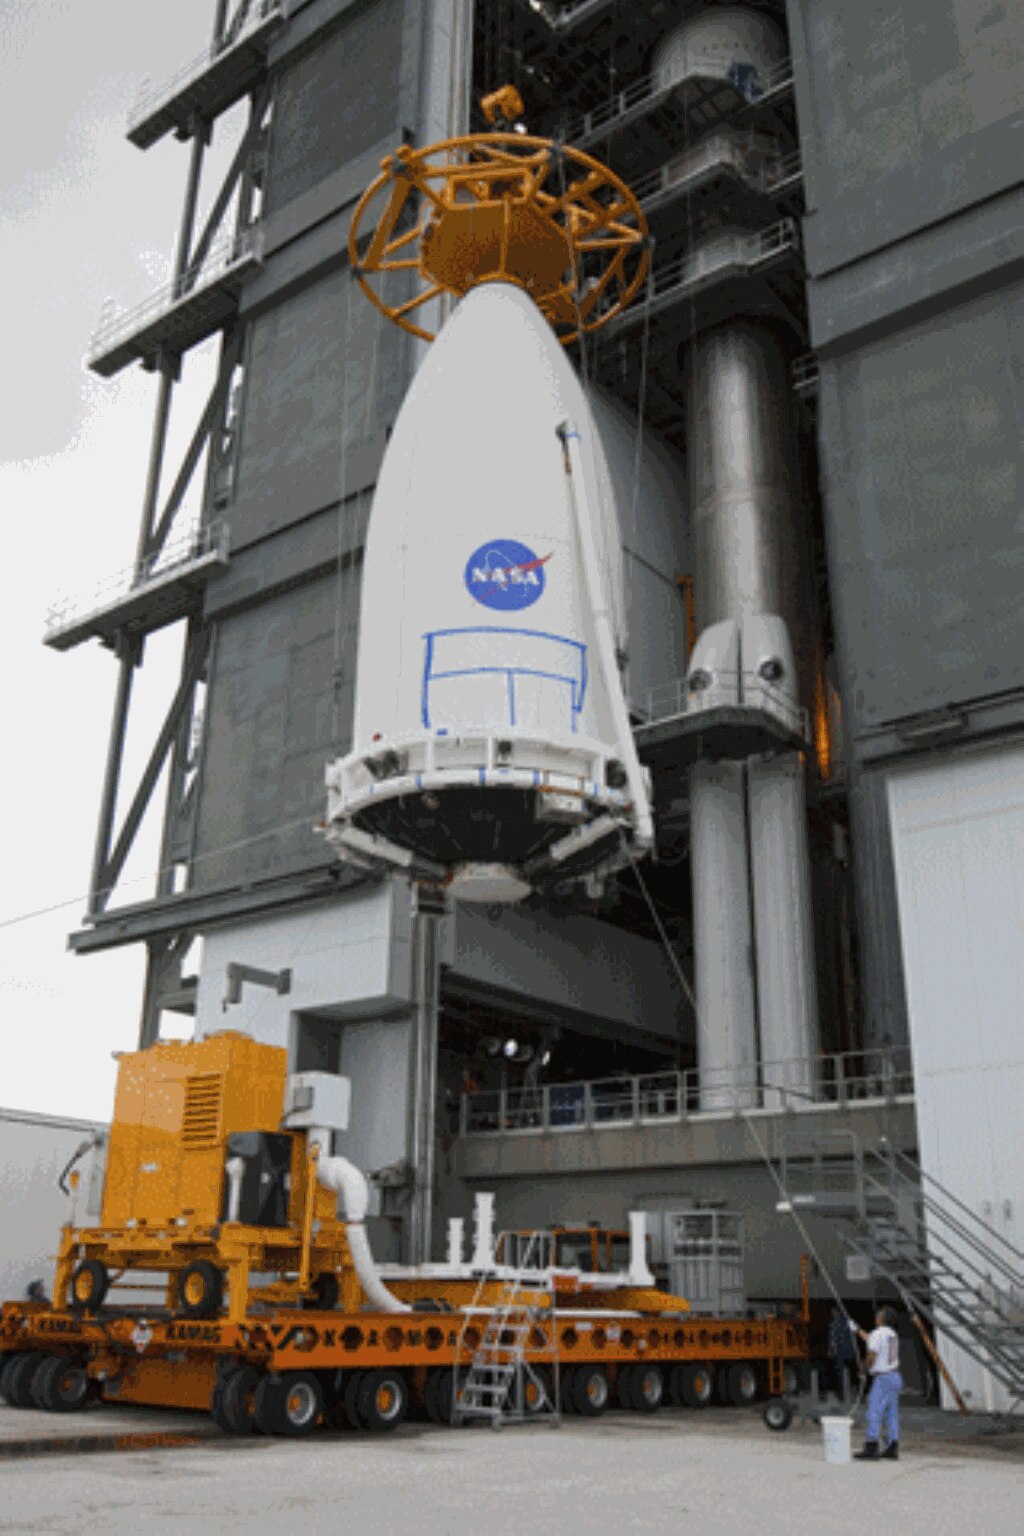 At Space Launch Complex 41, the payload container holding NASA's Mars Science Laboratory (MSL) spacecraft is lifted up the side of the Vertical Integration Facility. (NASA/Tony Gray)